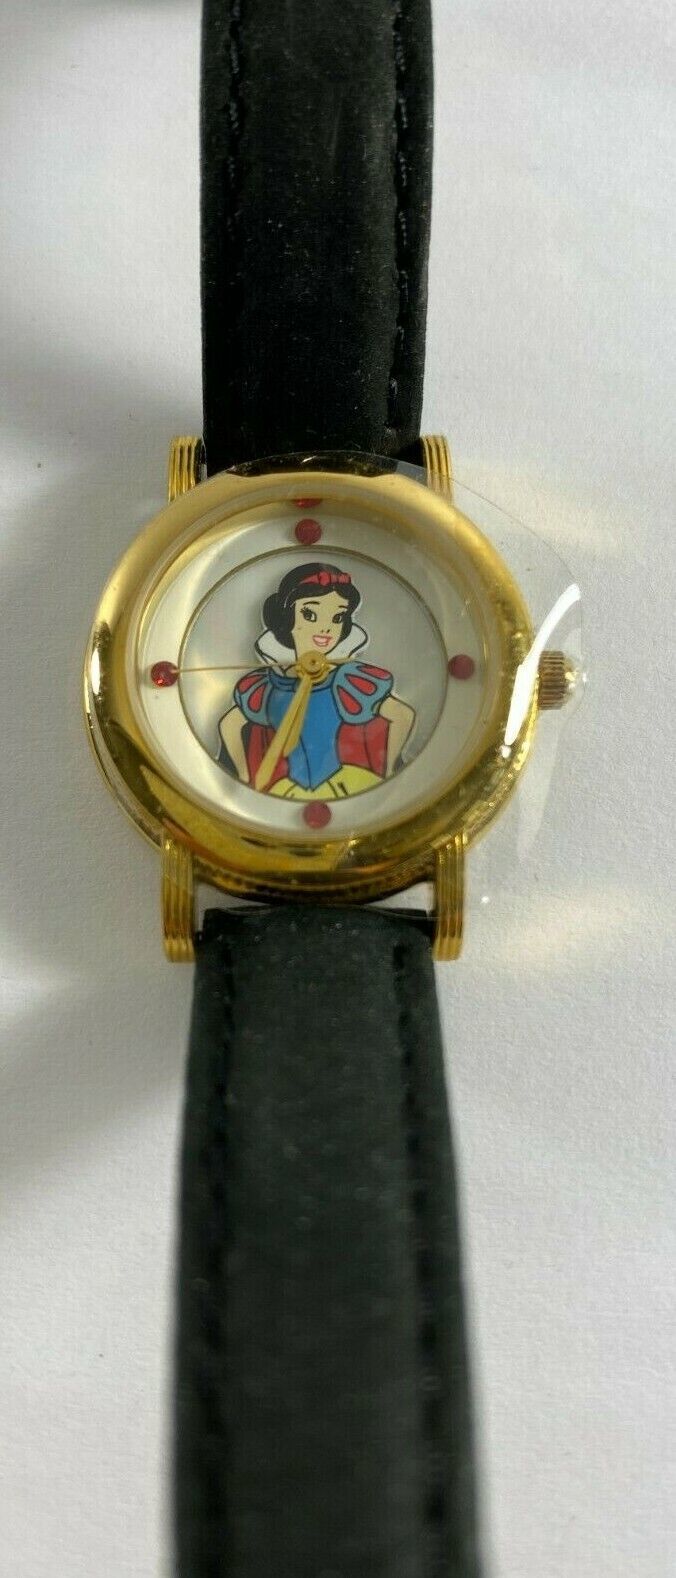 Primary image for Disney Princess Timepiece Collection SNOW WHITE Limited Edition Watch 17 of 2500